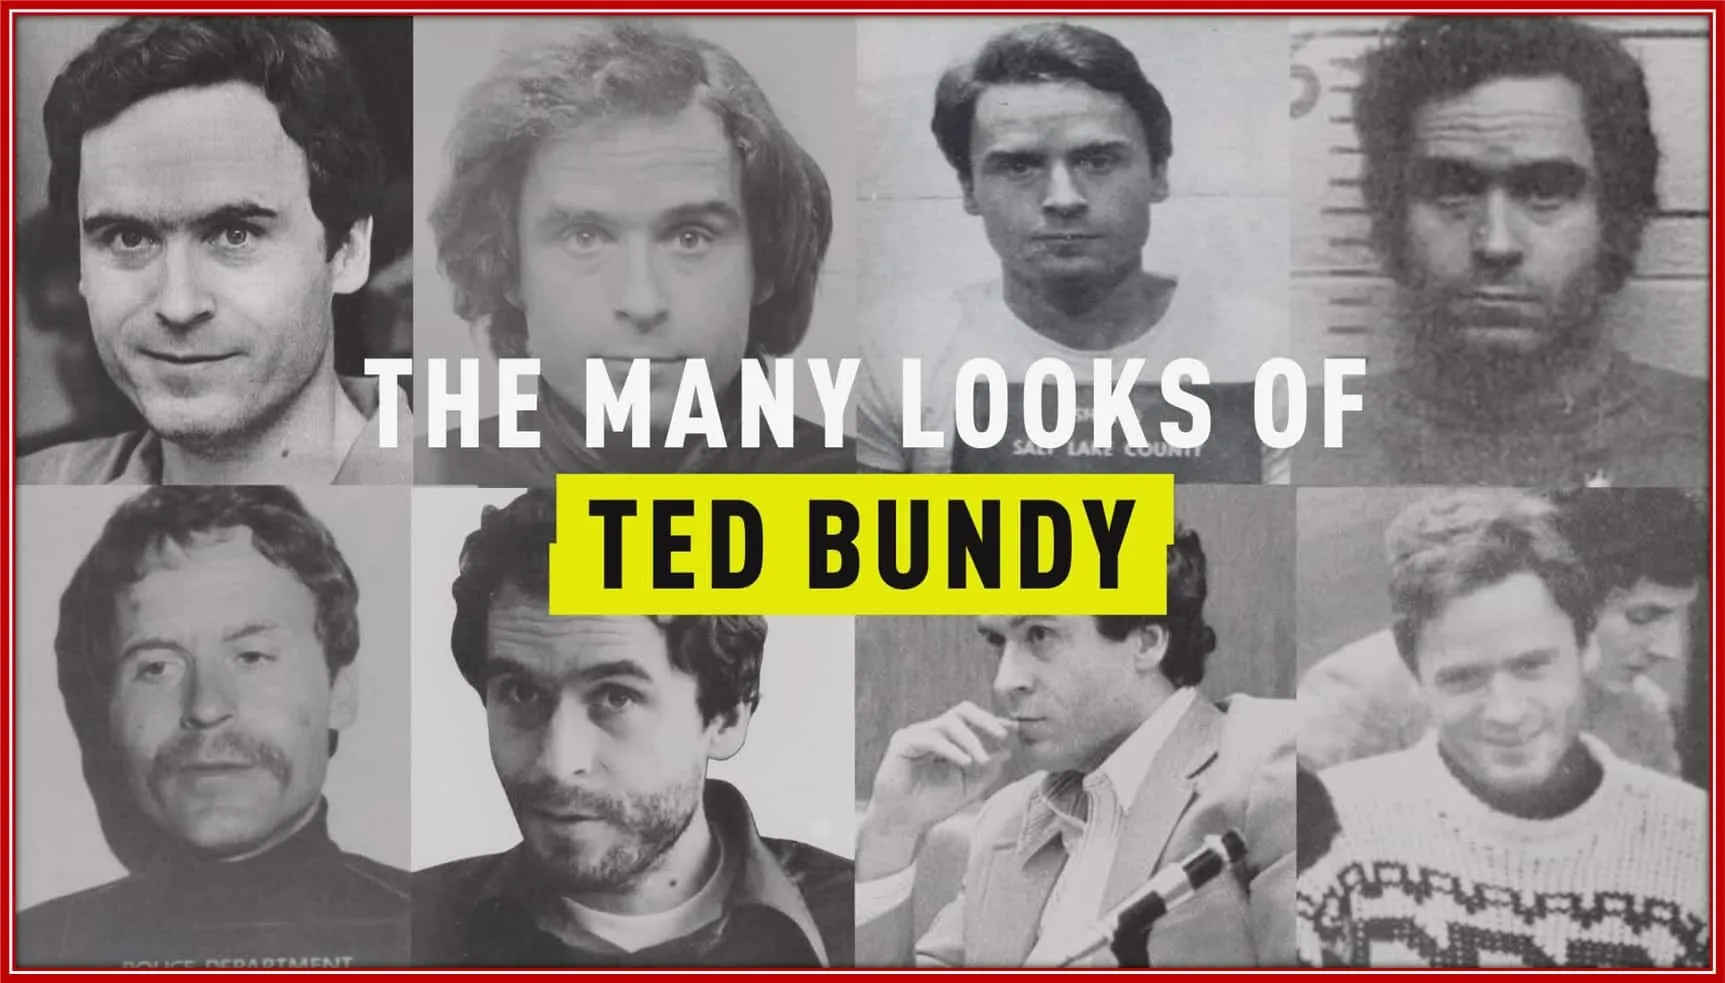 The many looks of Ted Bundy.